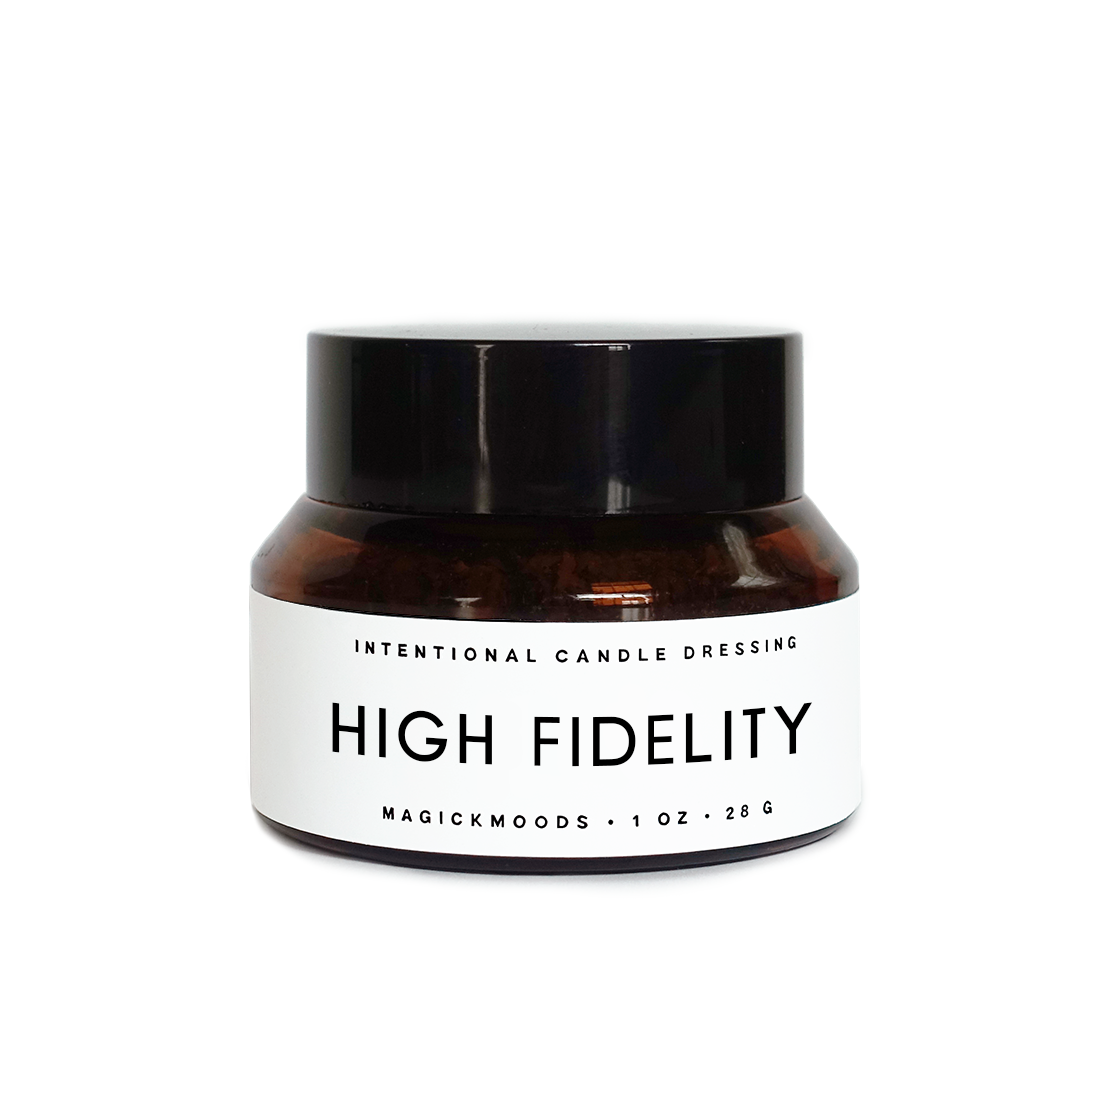 High Fidelity Candle Dressing